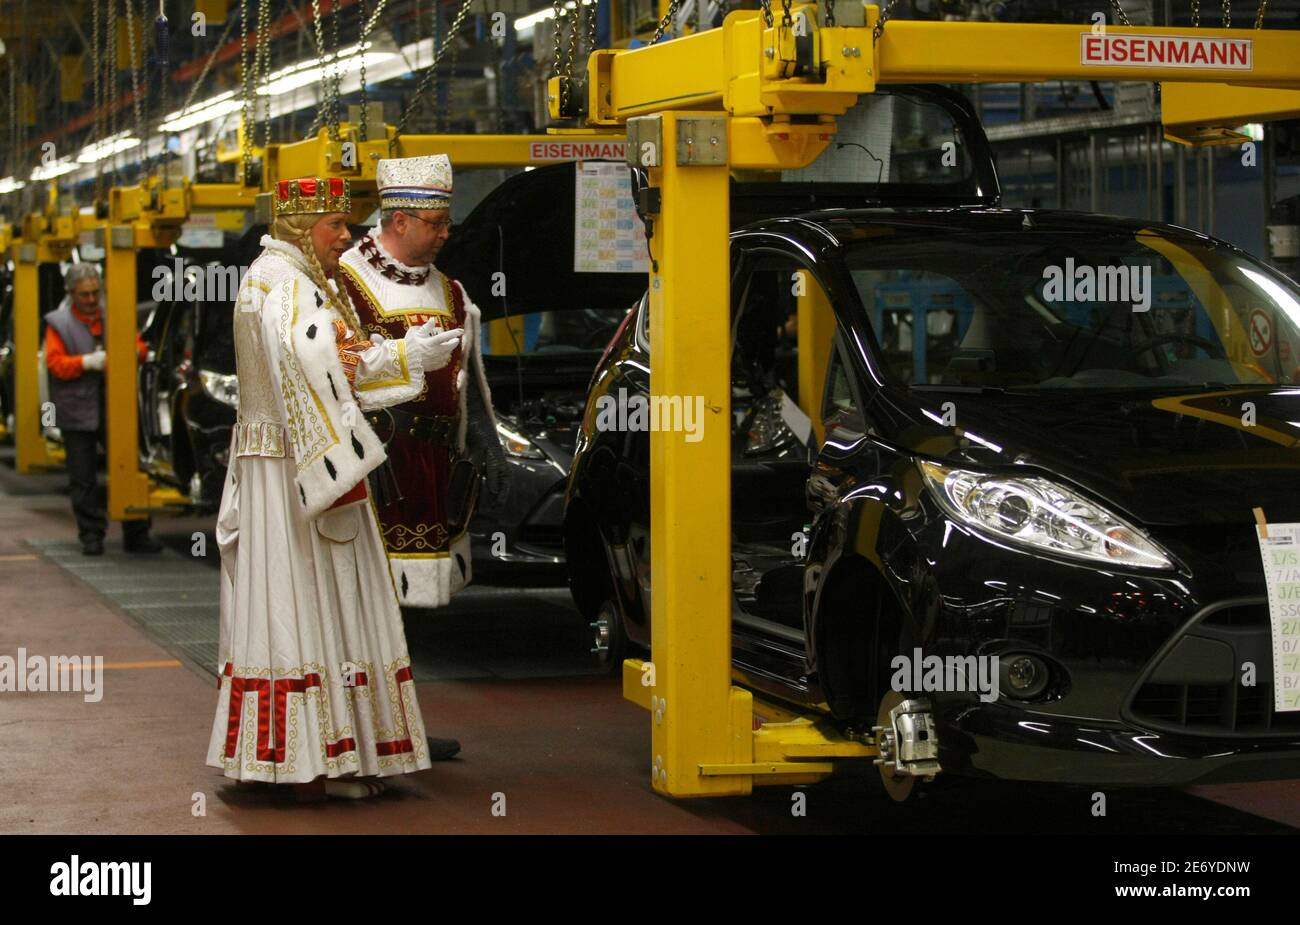 The Cologne carnival triumvirate 'Dreigestirn' visits the Cologne plant of the Ford Motor Company January 27, 2010. The Cologne plant is the first Ford assembly facility in the world to build the new generation Ford Fiesta.   REUTERS/Ina Fassbender   (GERMANY - Tags: TRANSPORT EMPLOYMENT BUSINESS IMAGES OF THE DAY) Stock Photo